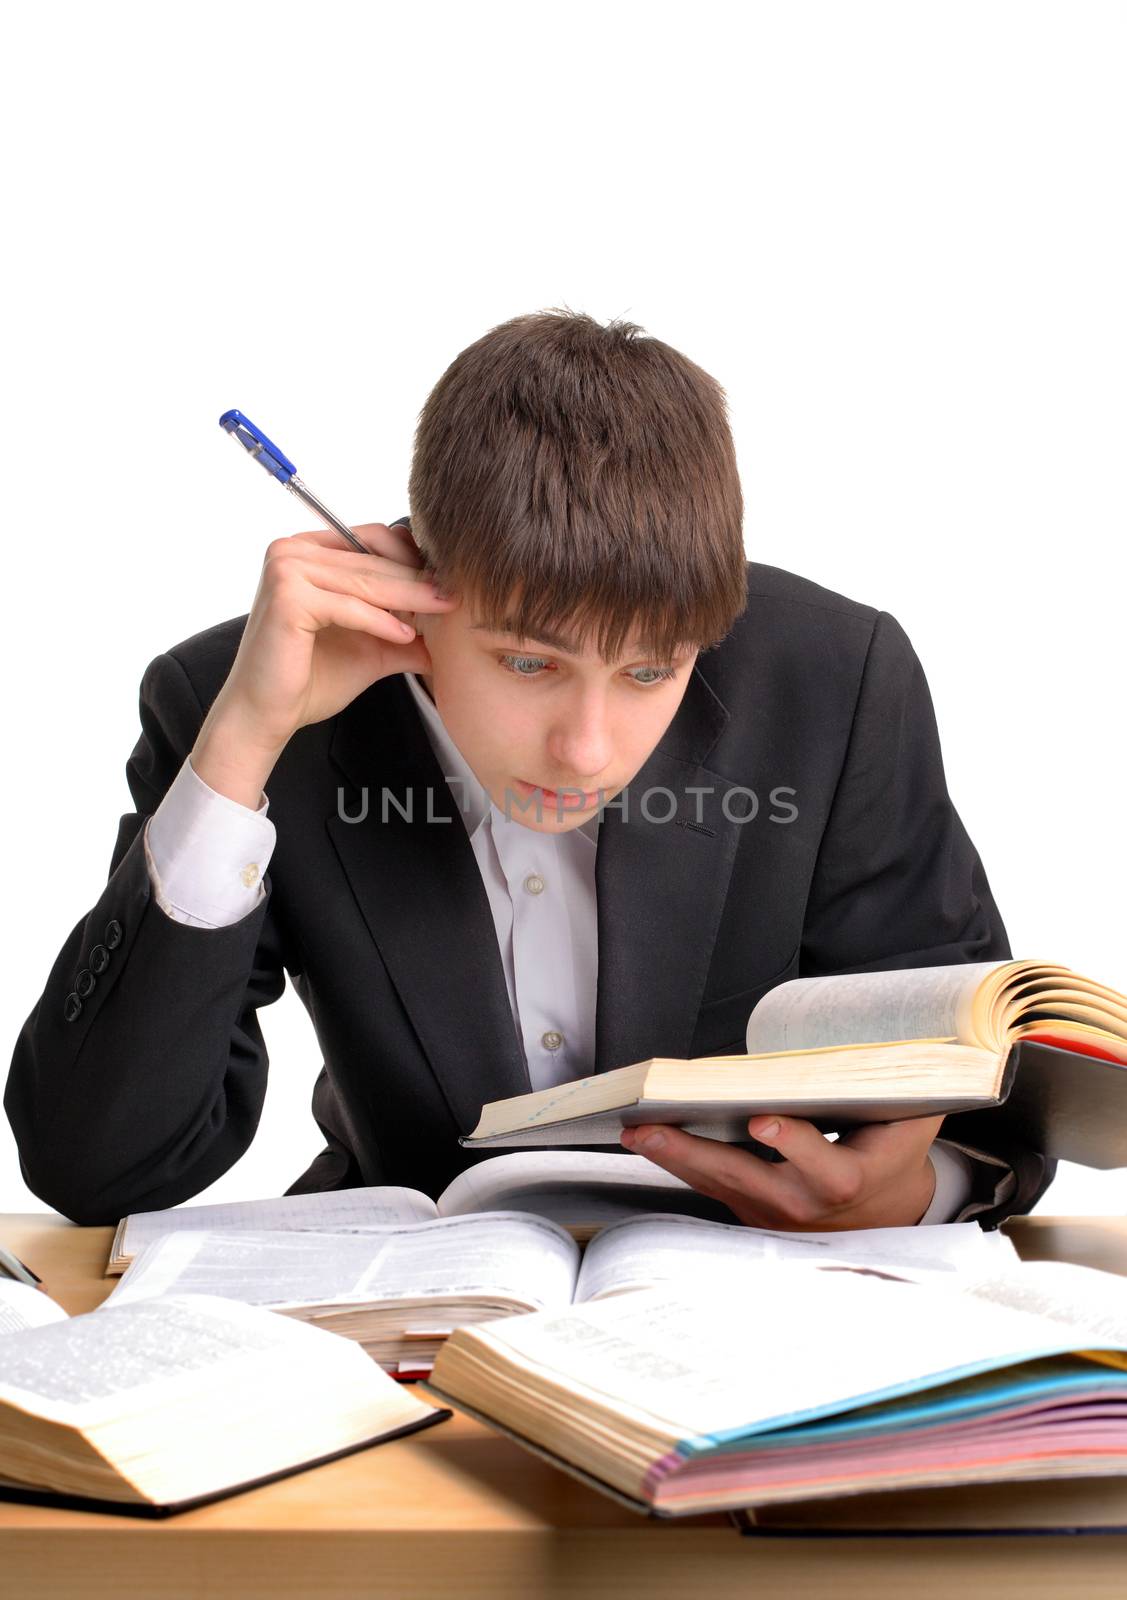 Student reading at the School Desk on the White Background